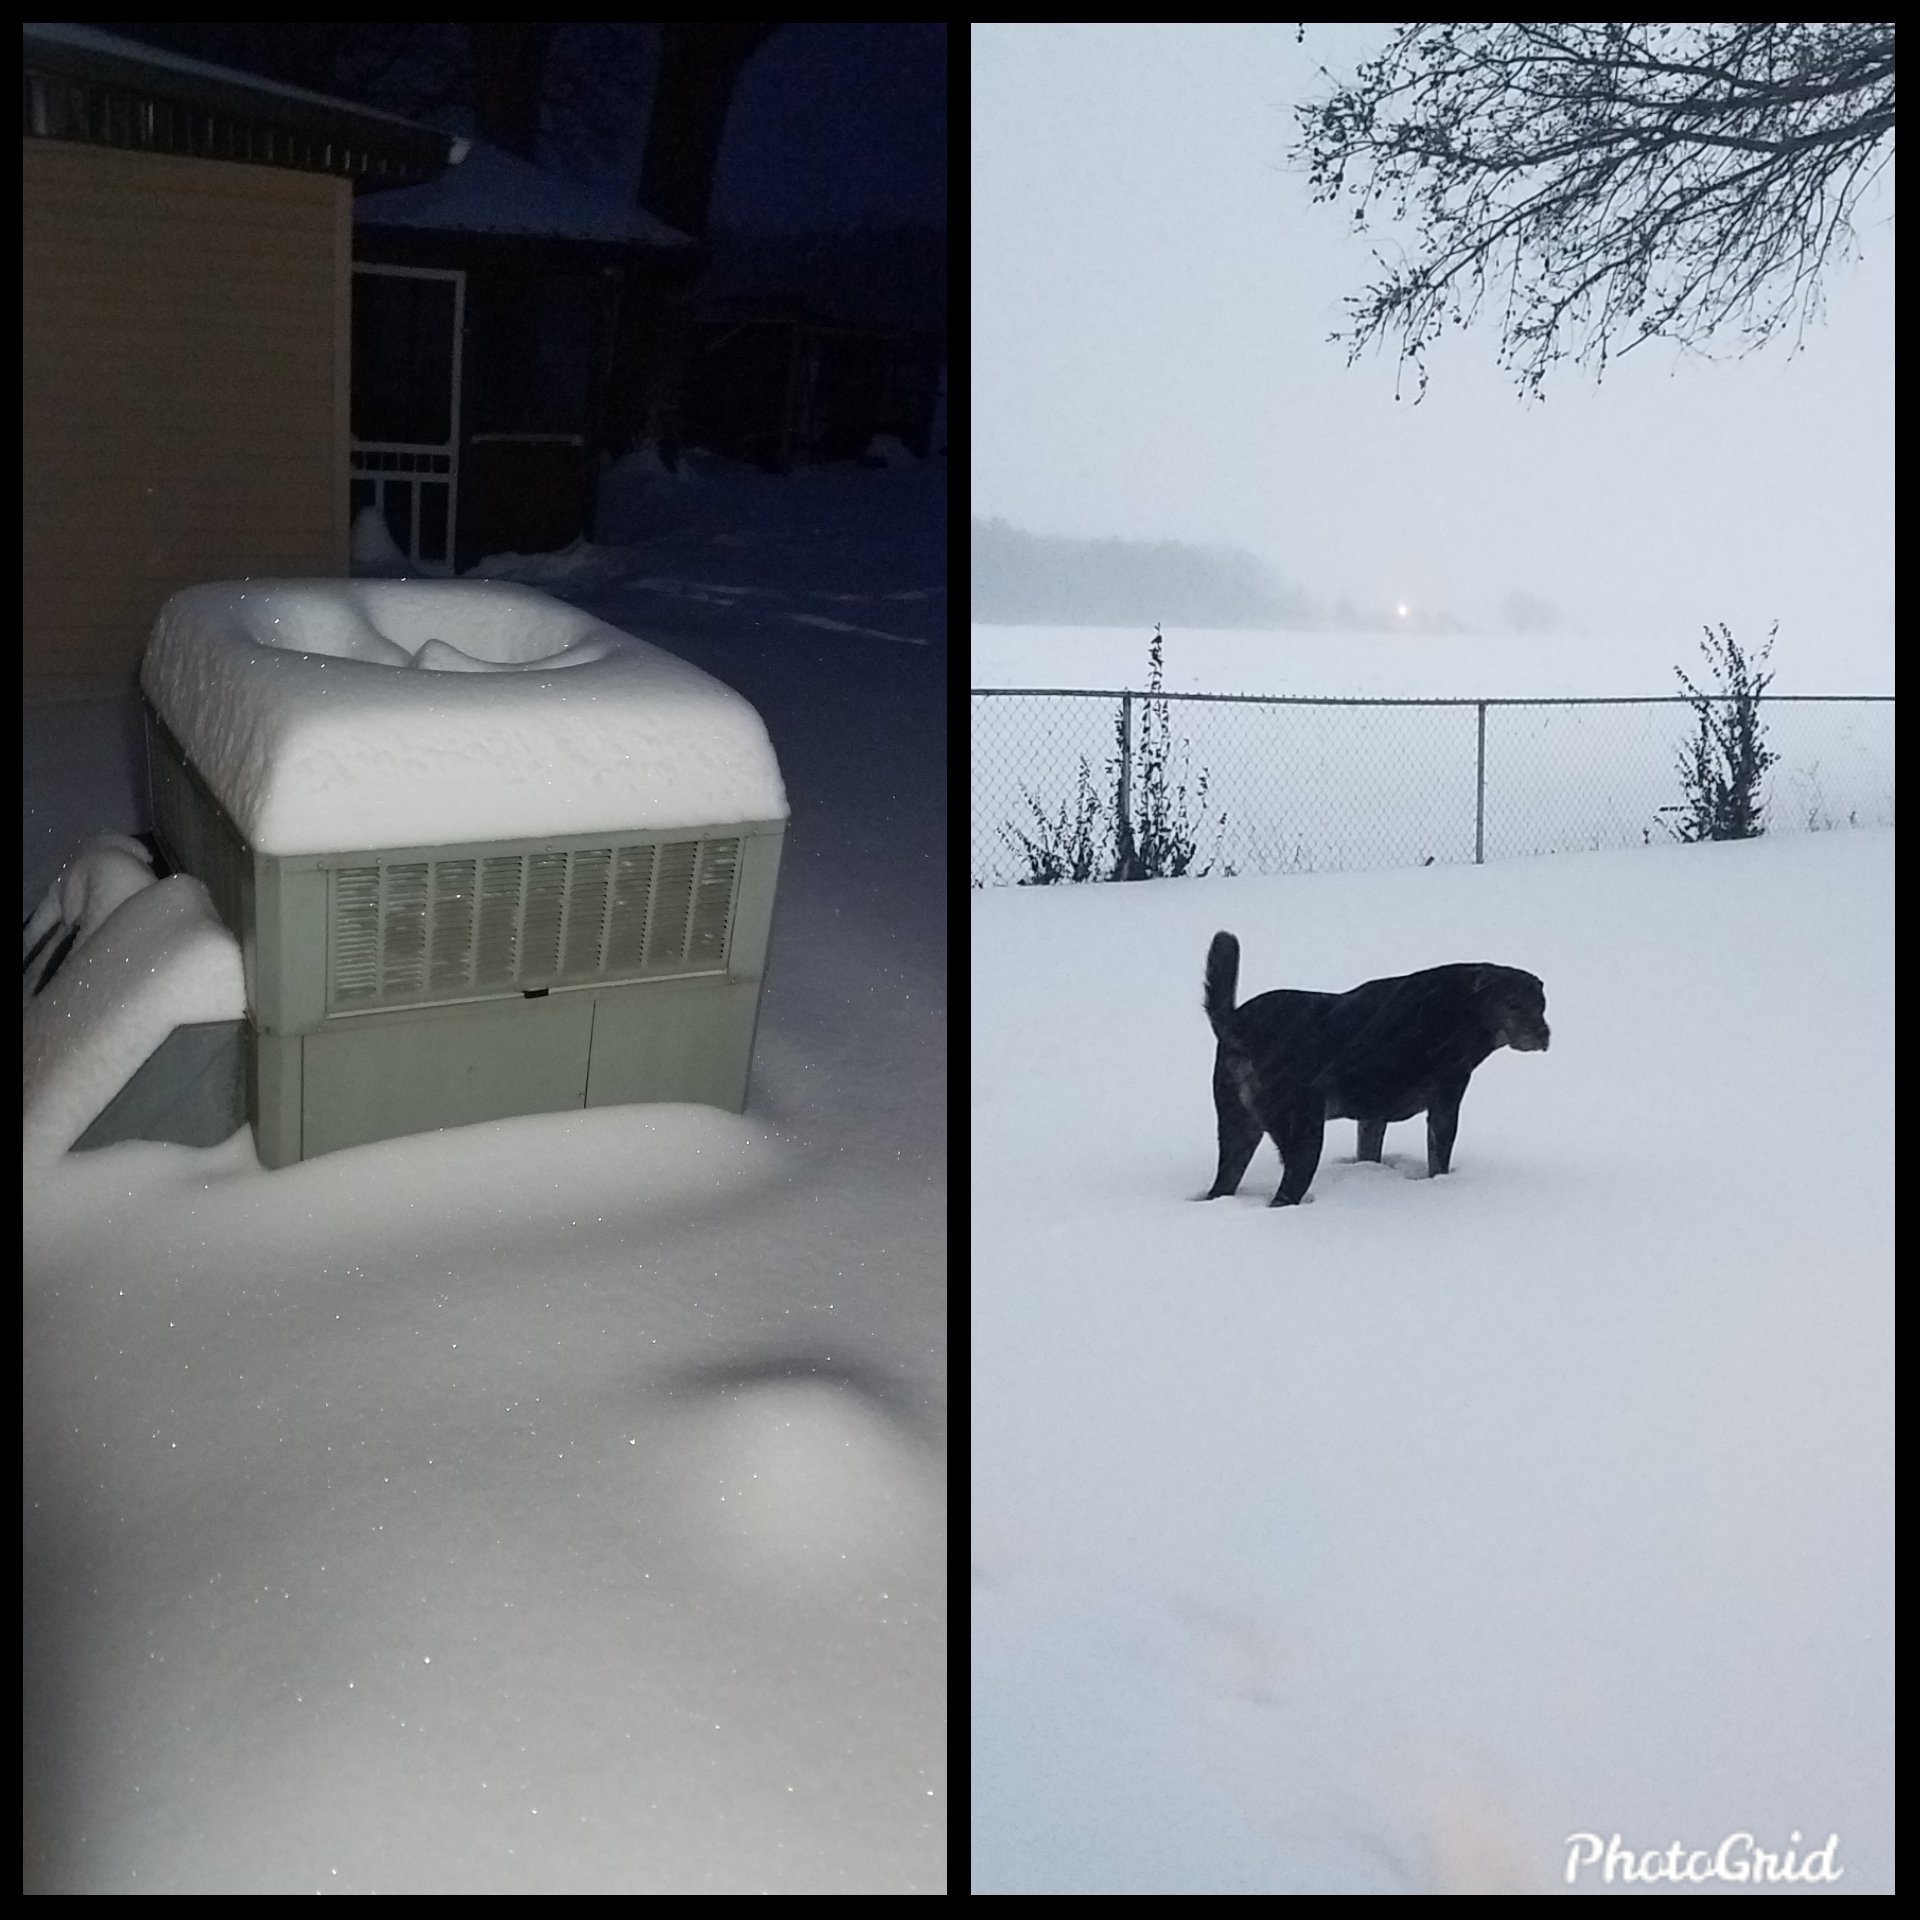 Photos of snow accumulation on an A/C unit and a dog walking in the deep snow.